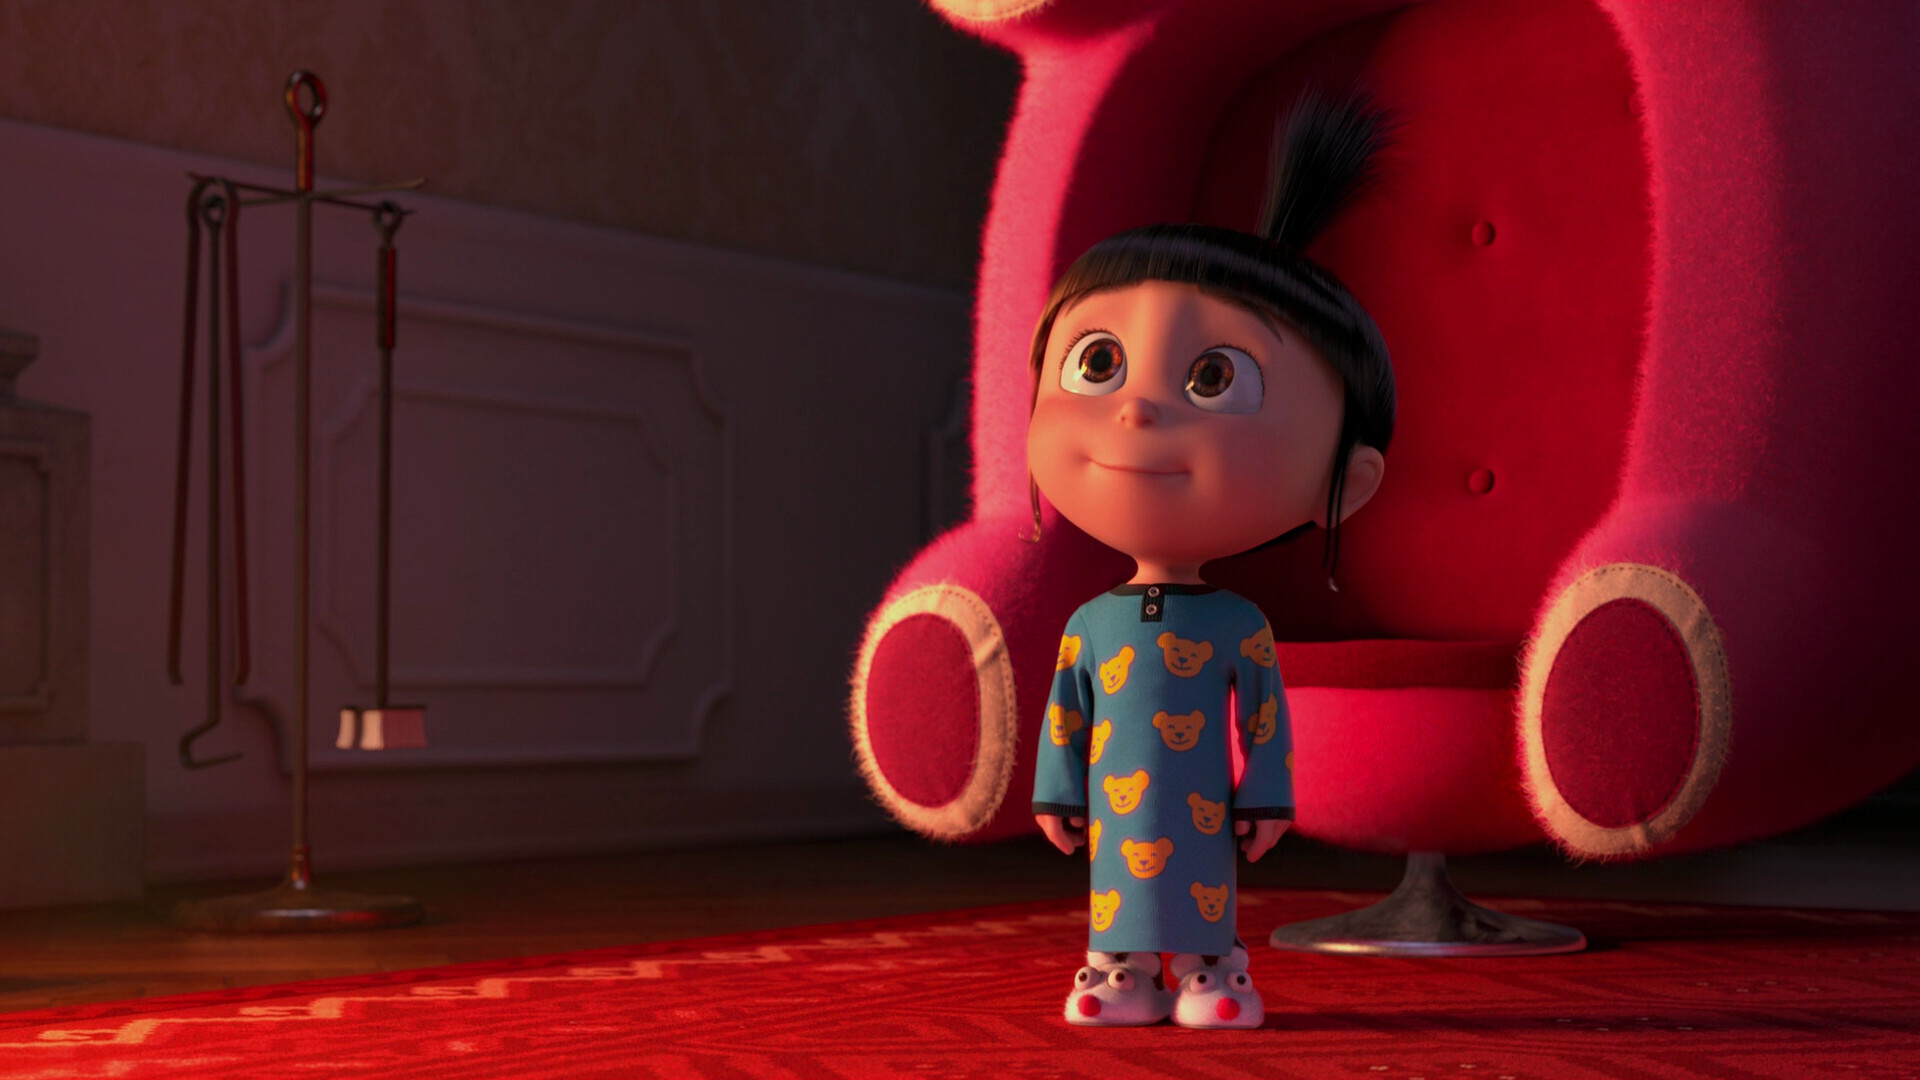 Despicable Me: Agnes, Gru's youngest innocent and immature adopted daughter. 1920x1080 Full HD Wallpaper.